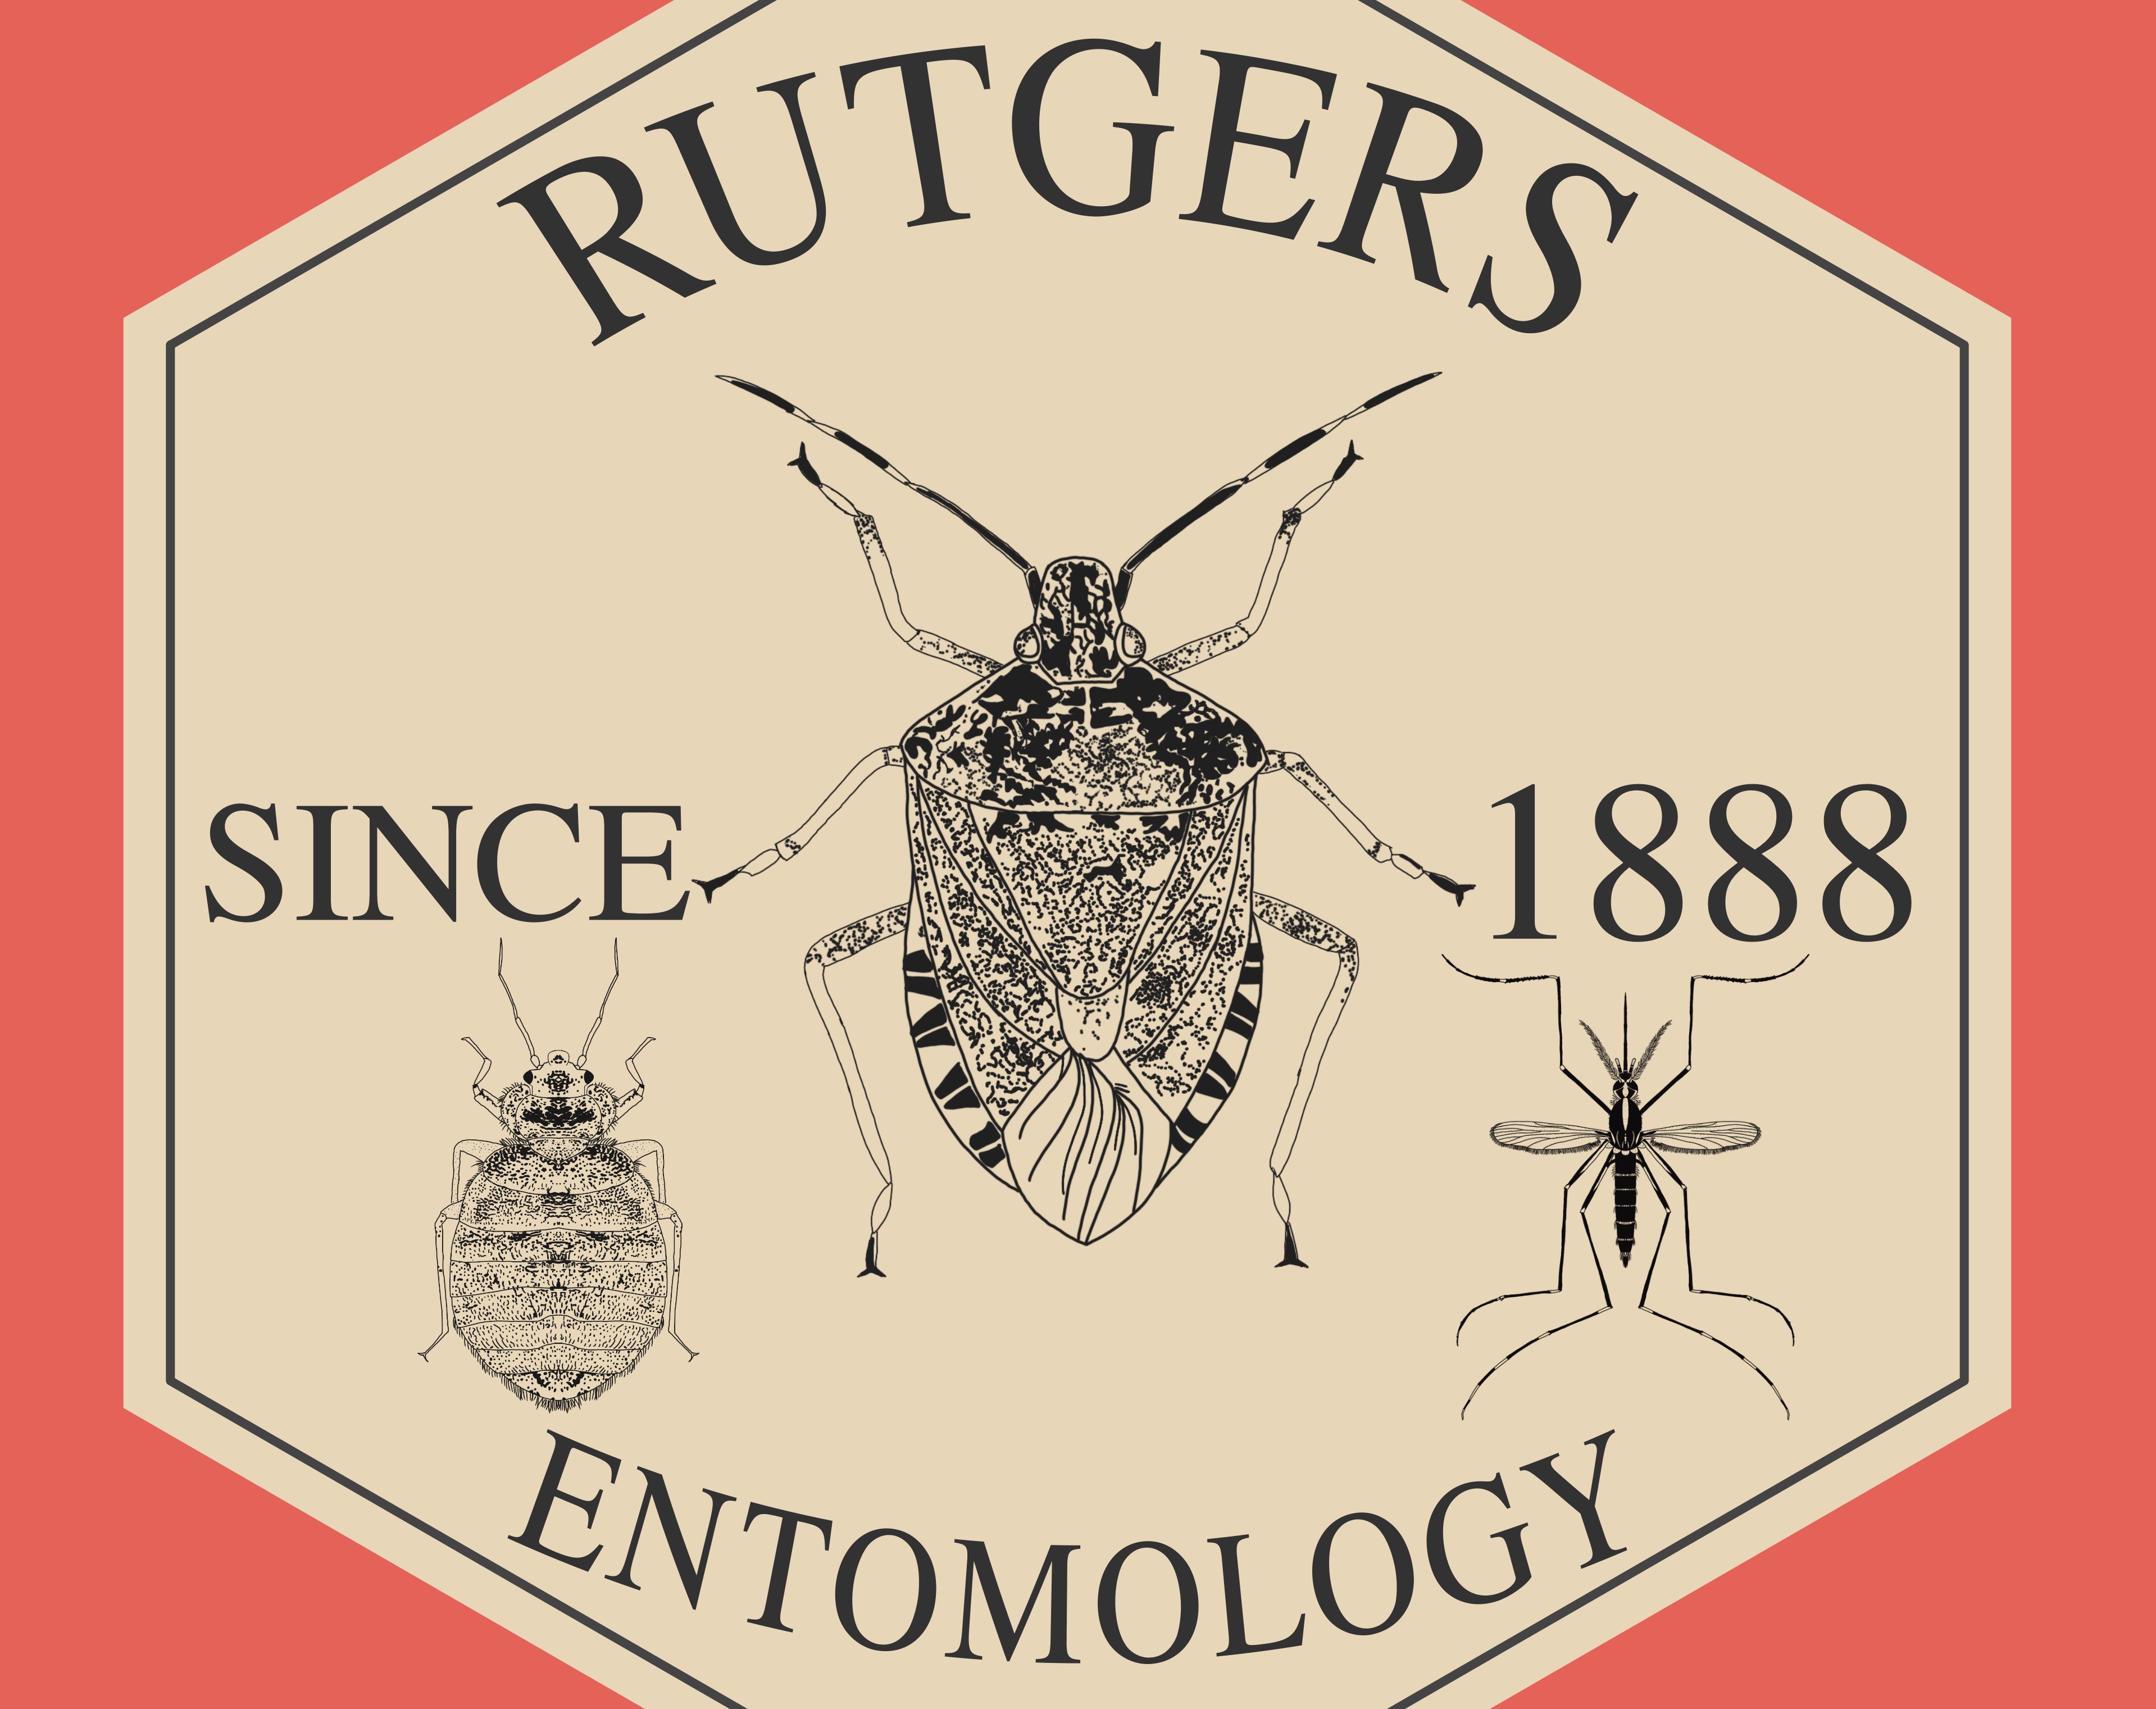 News and Events - Department of Entomology